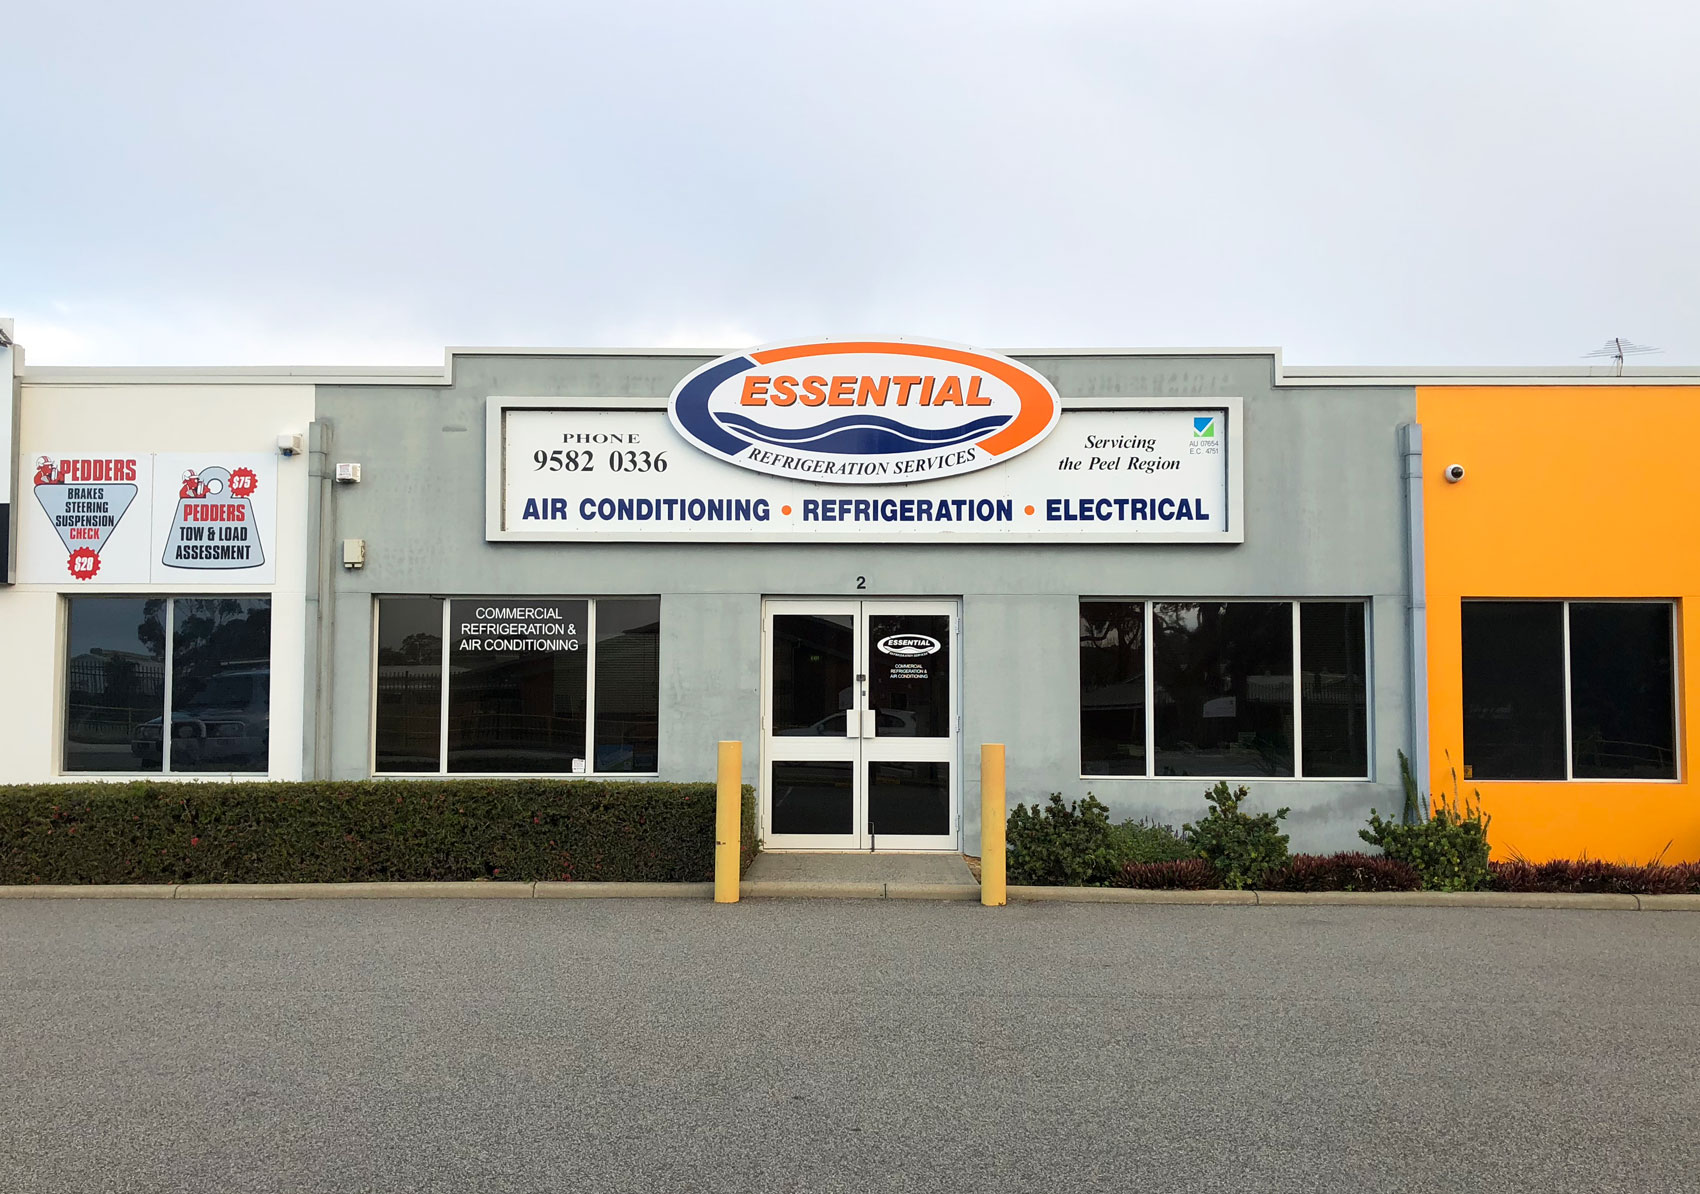 Front view of Essential Refrigeration Services shop